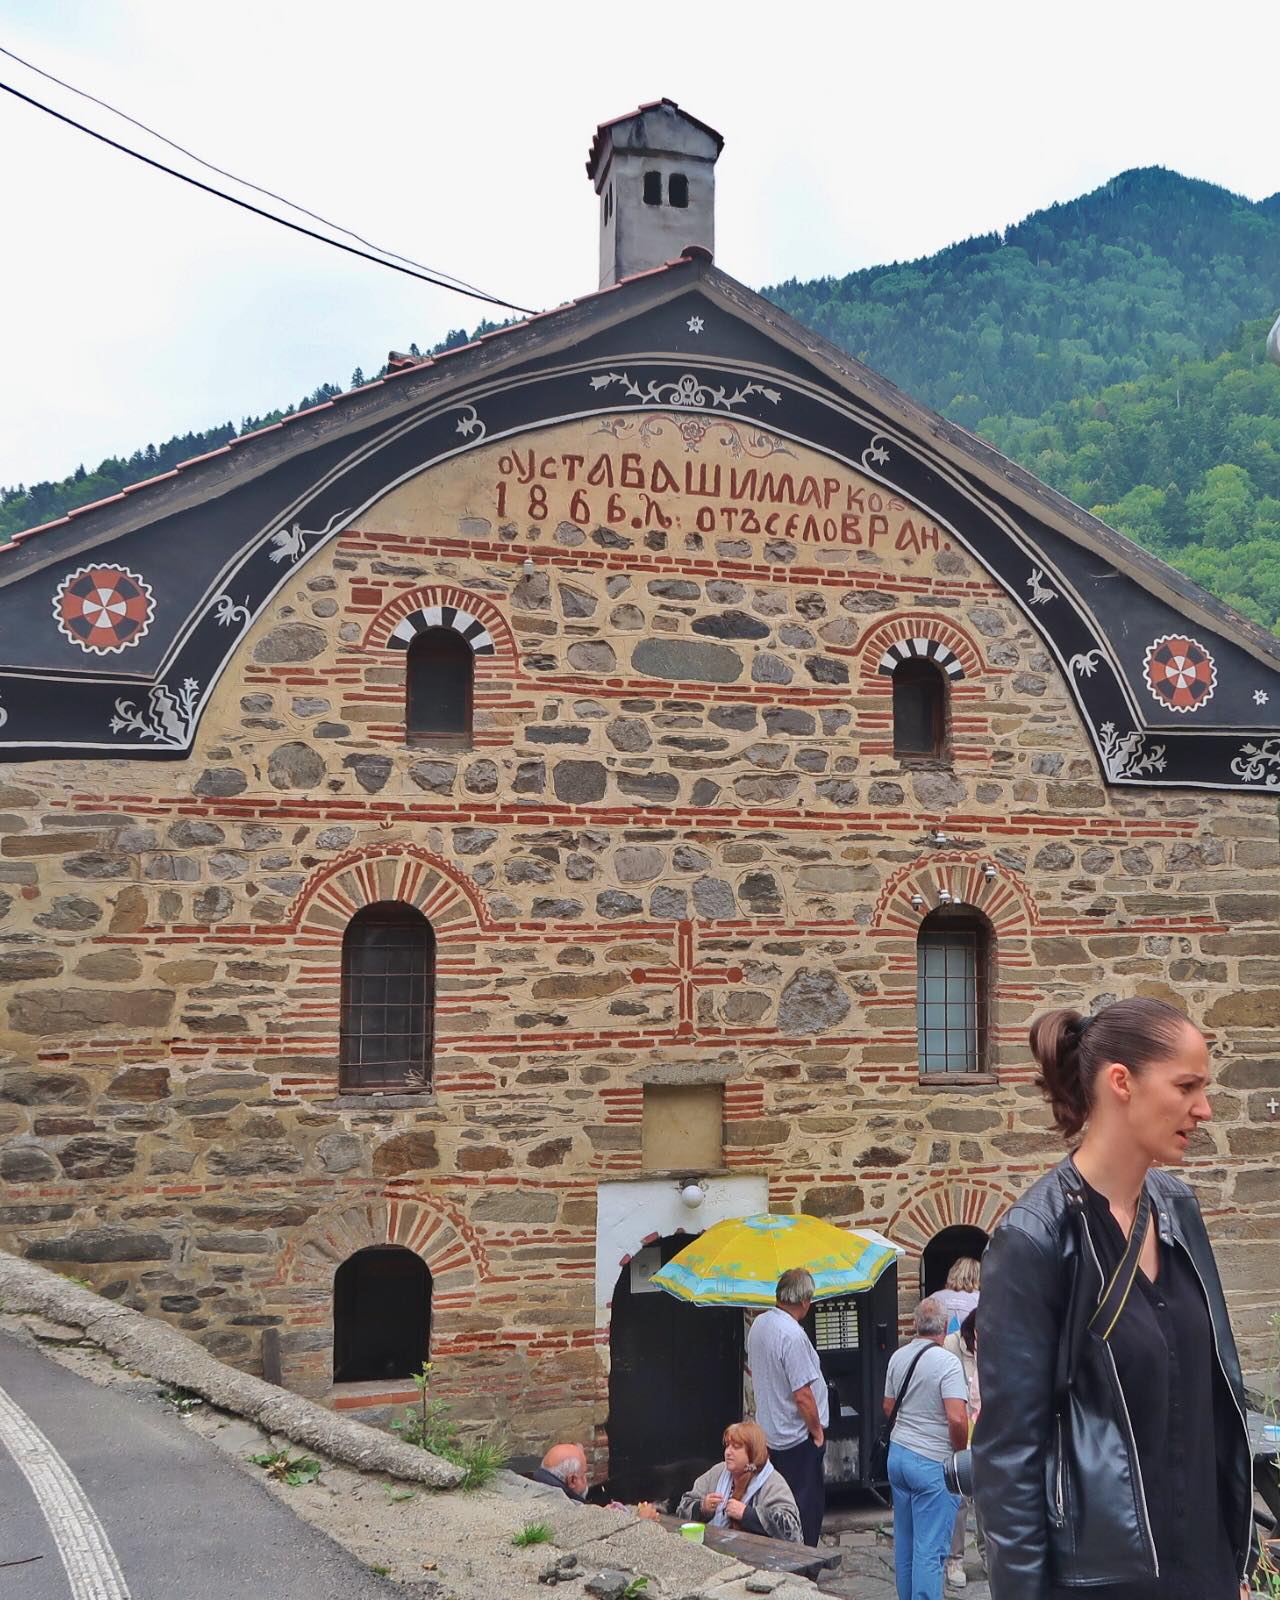 Meet up with a blog reader and a Roadtrip to RILA MONASTERY in Bulgaria